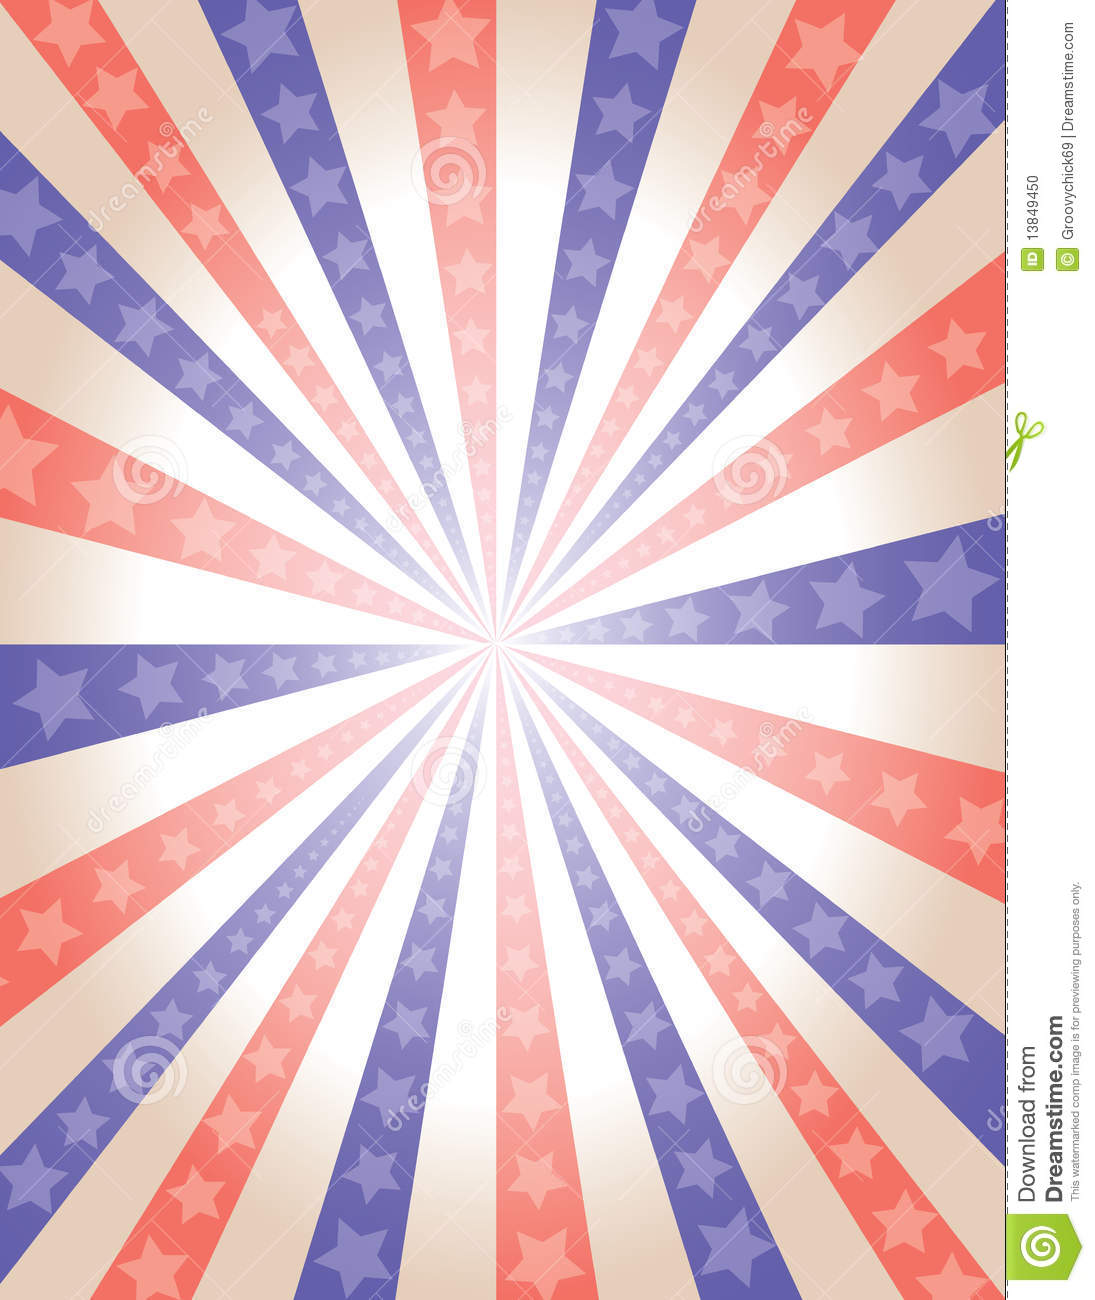 Illustration Of A Stars And Stripes Background Celebrating The 4th